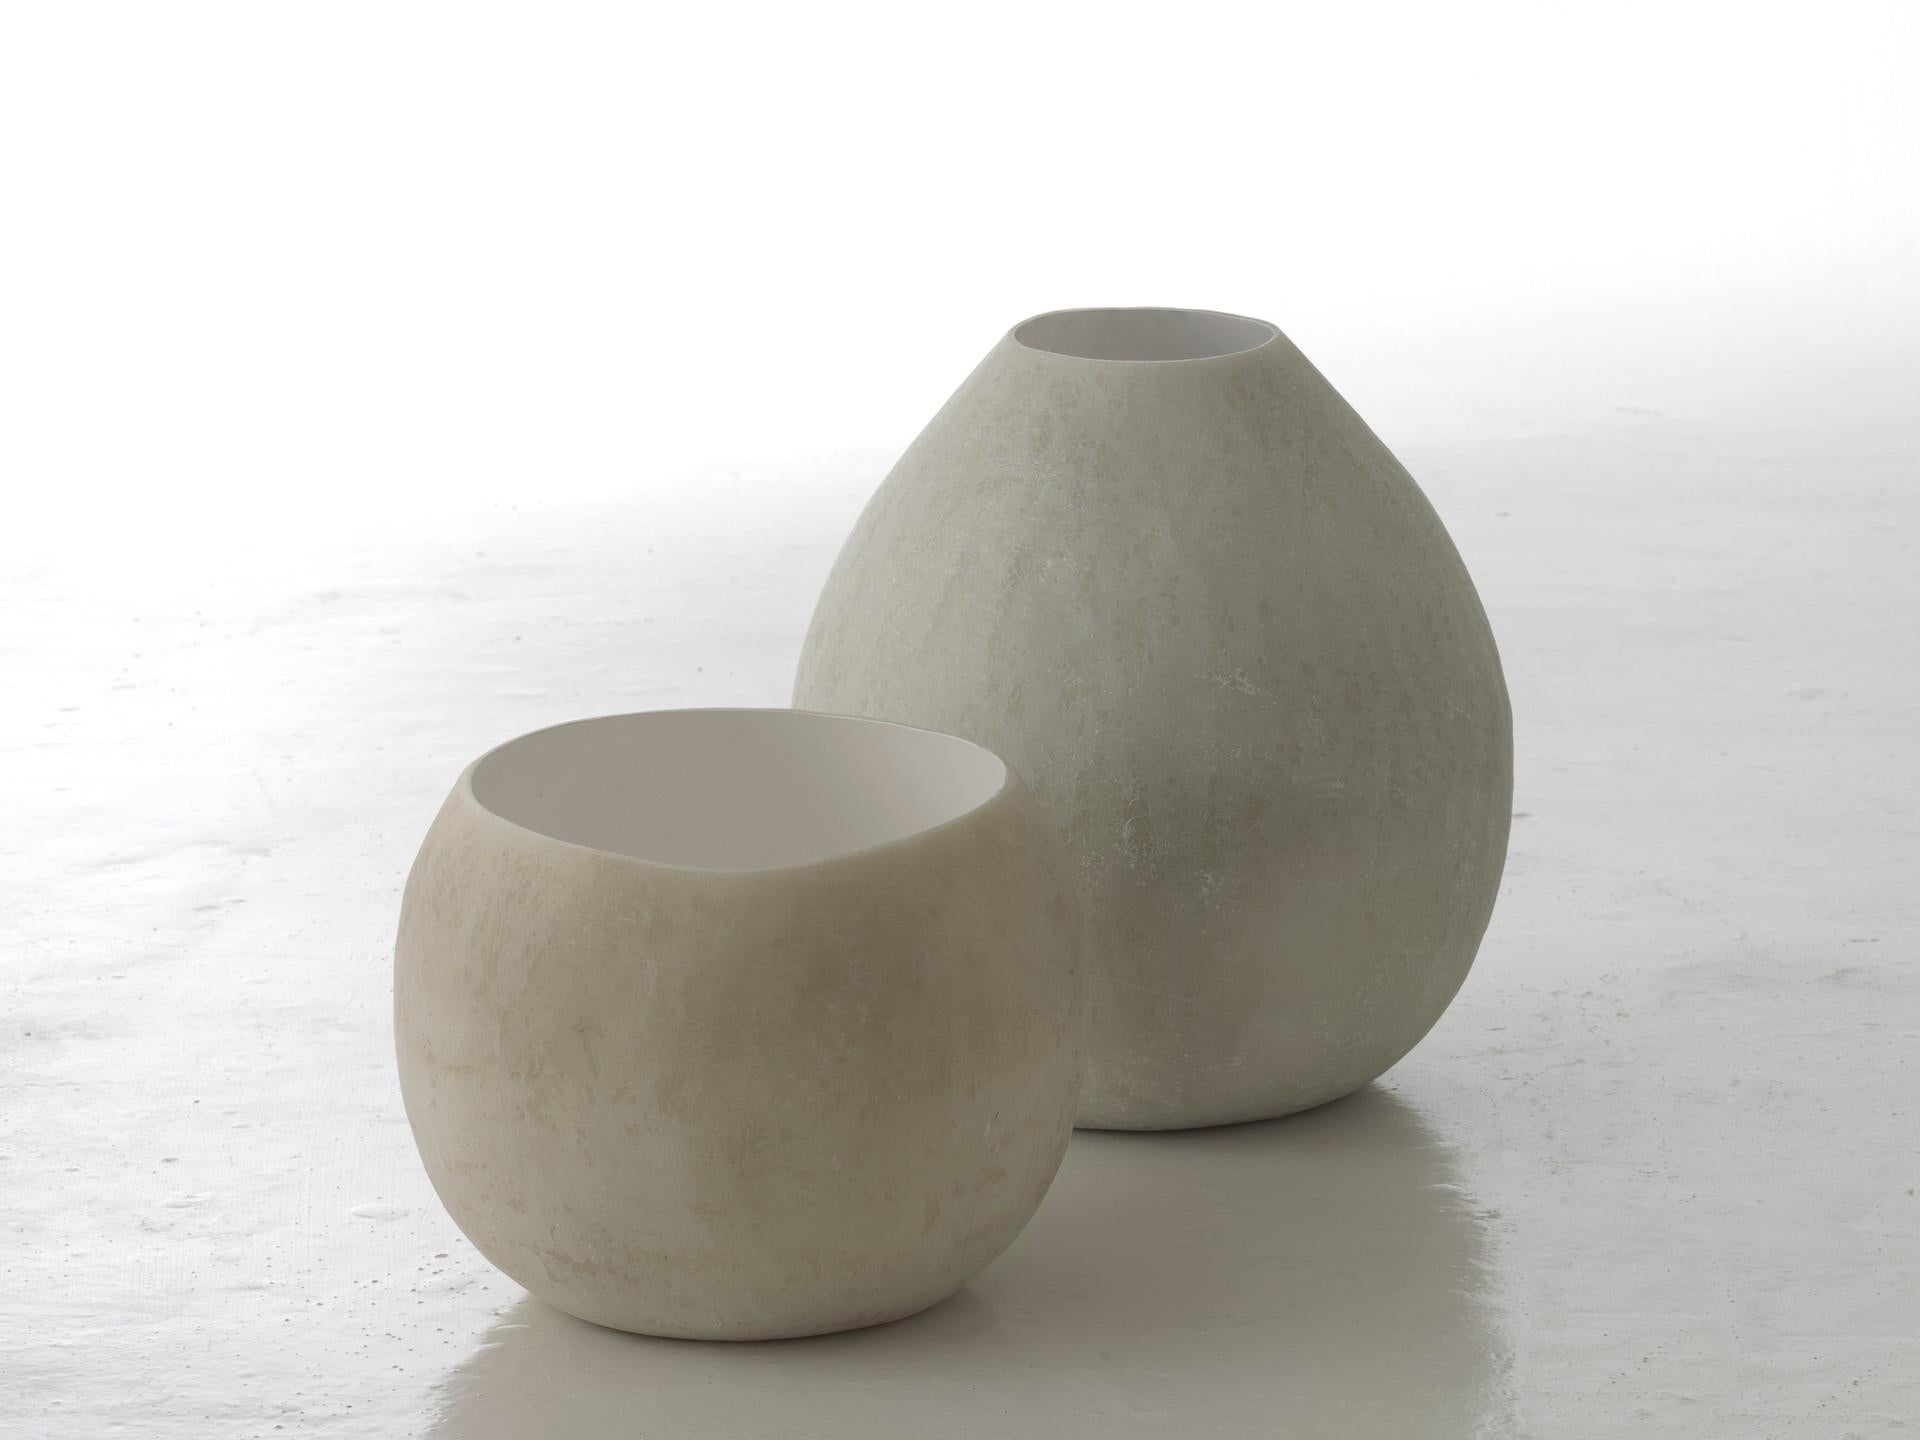 Pair of Bulbo vases by Imperfettolab
Dimensions: 
Ø 47 x H 50 cm
Ø 47 x H 42 cm
Materials: Raw material


Imperfetto Lab
Who we are ? We are a family.
Verter Turroni, Emanuela Ravelli and our children Elia, Margherita and Eusebio.
All